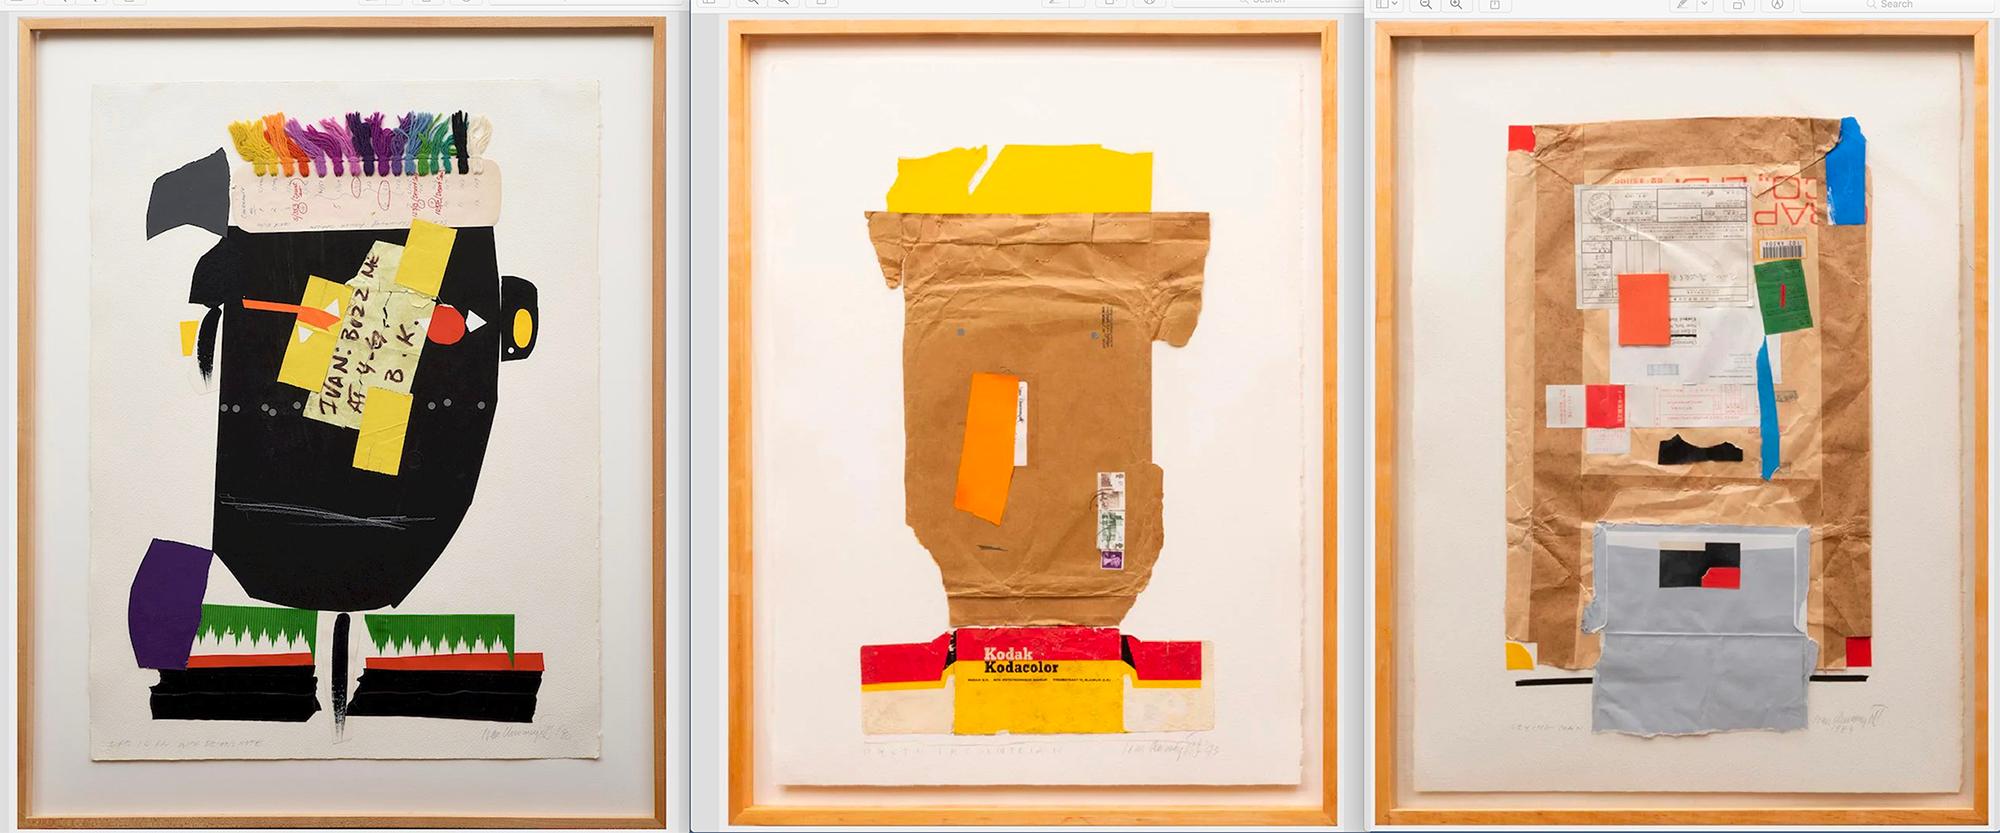 Mixed media on paper, 1990, signed 'Ivan Chermayeff' and dated lower right, titled lower left.

30 x 22 in. (sheet), 36 x 28 in. (frame).

Provenance:The artist, Art Planning Consultants New York

We have three works like this by Chermayeff.  They